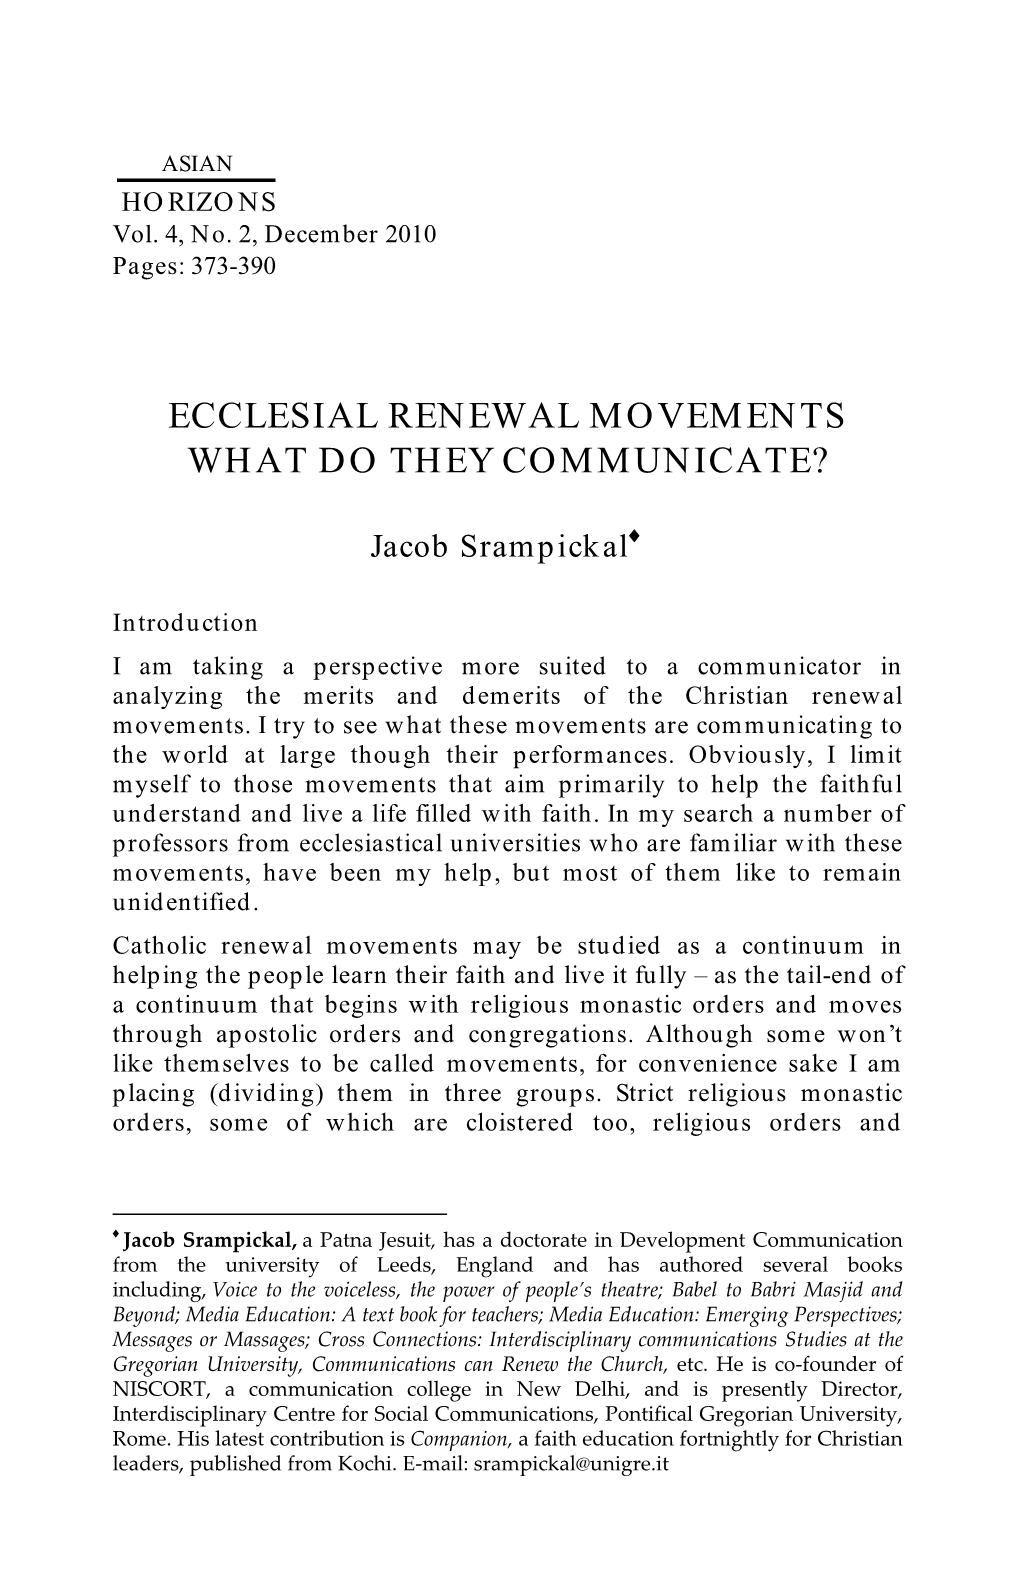 Ecclesial Renewal Movements What Do They Communicate?